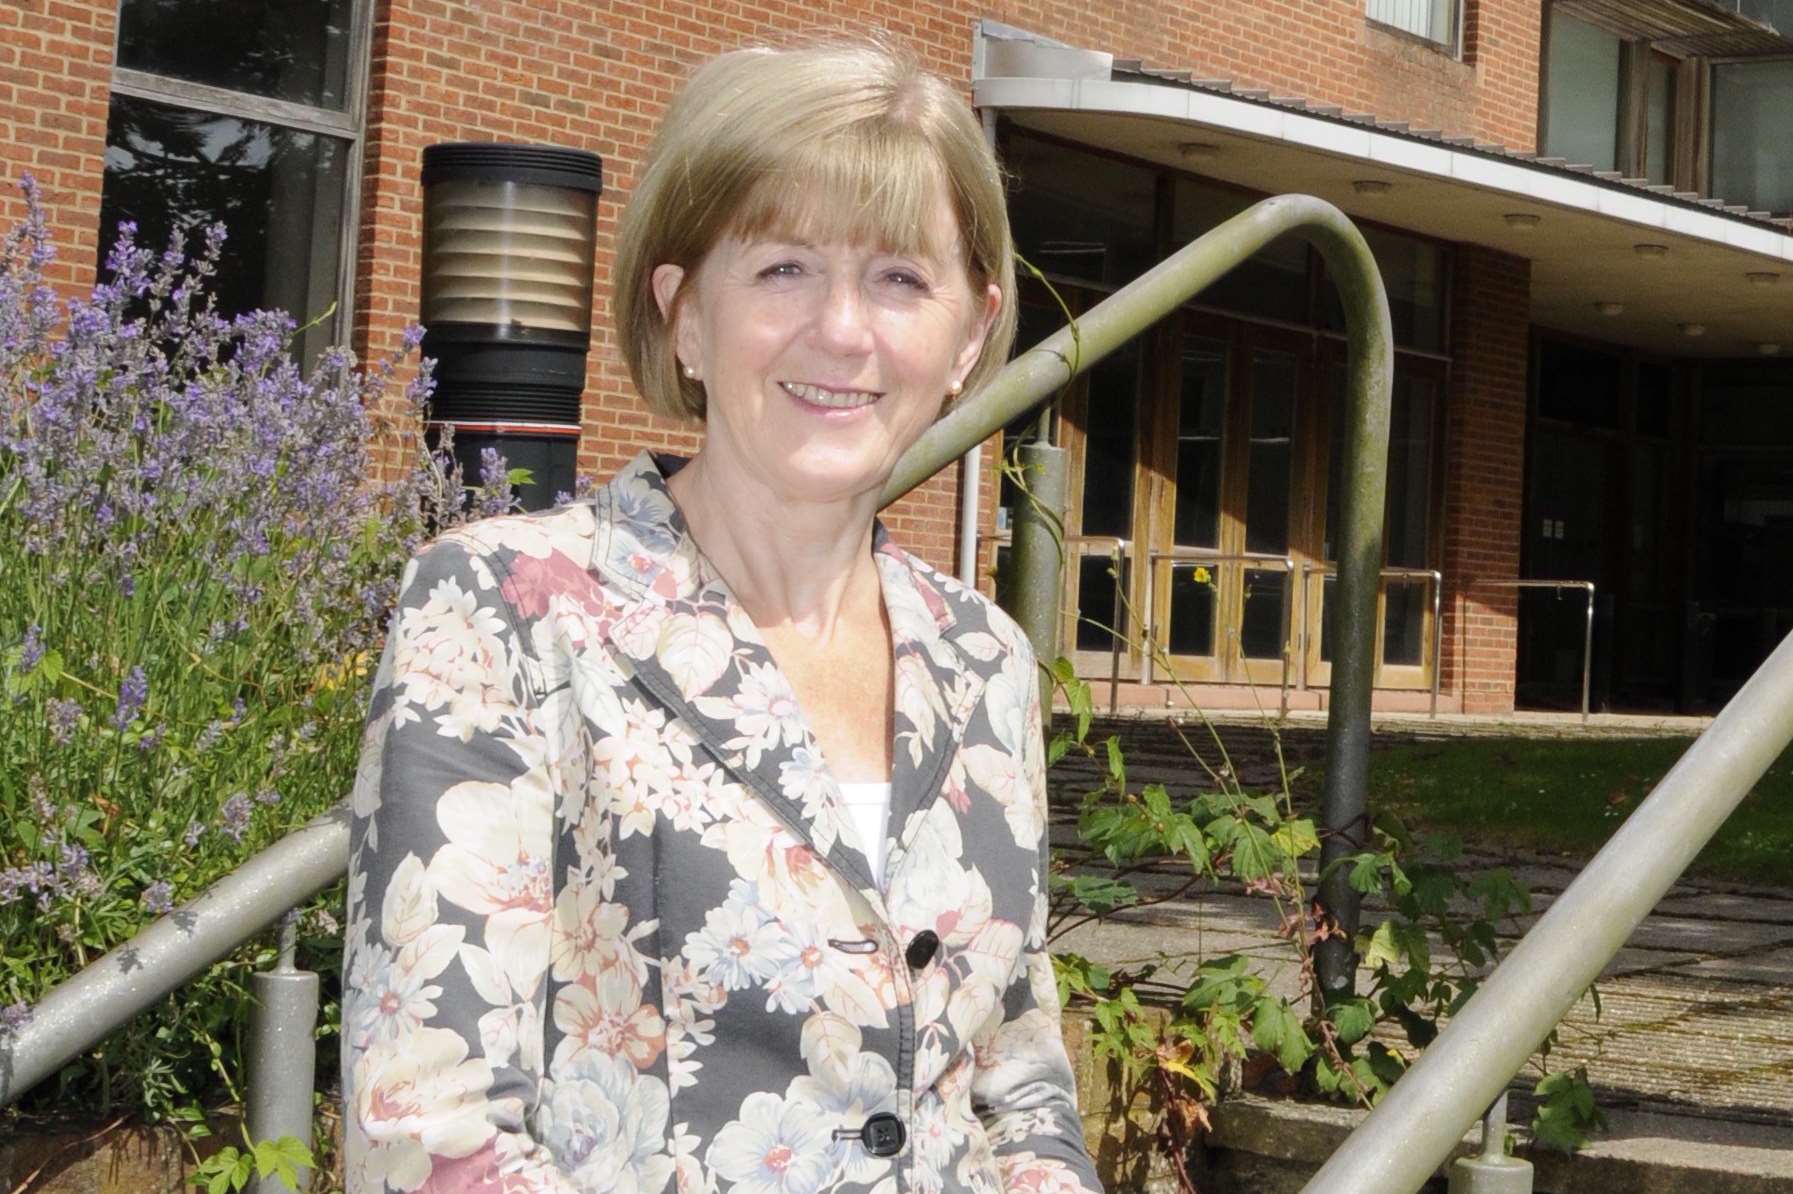 Wye School's chair of governors Margaret Williams